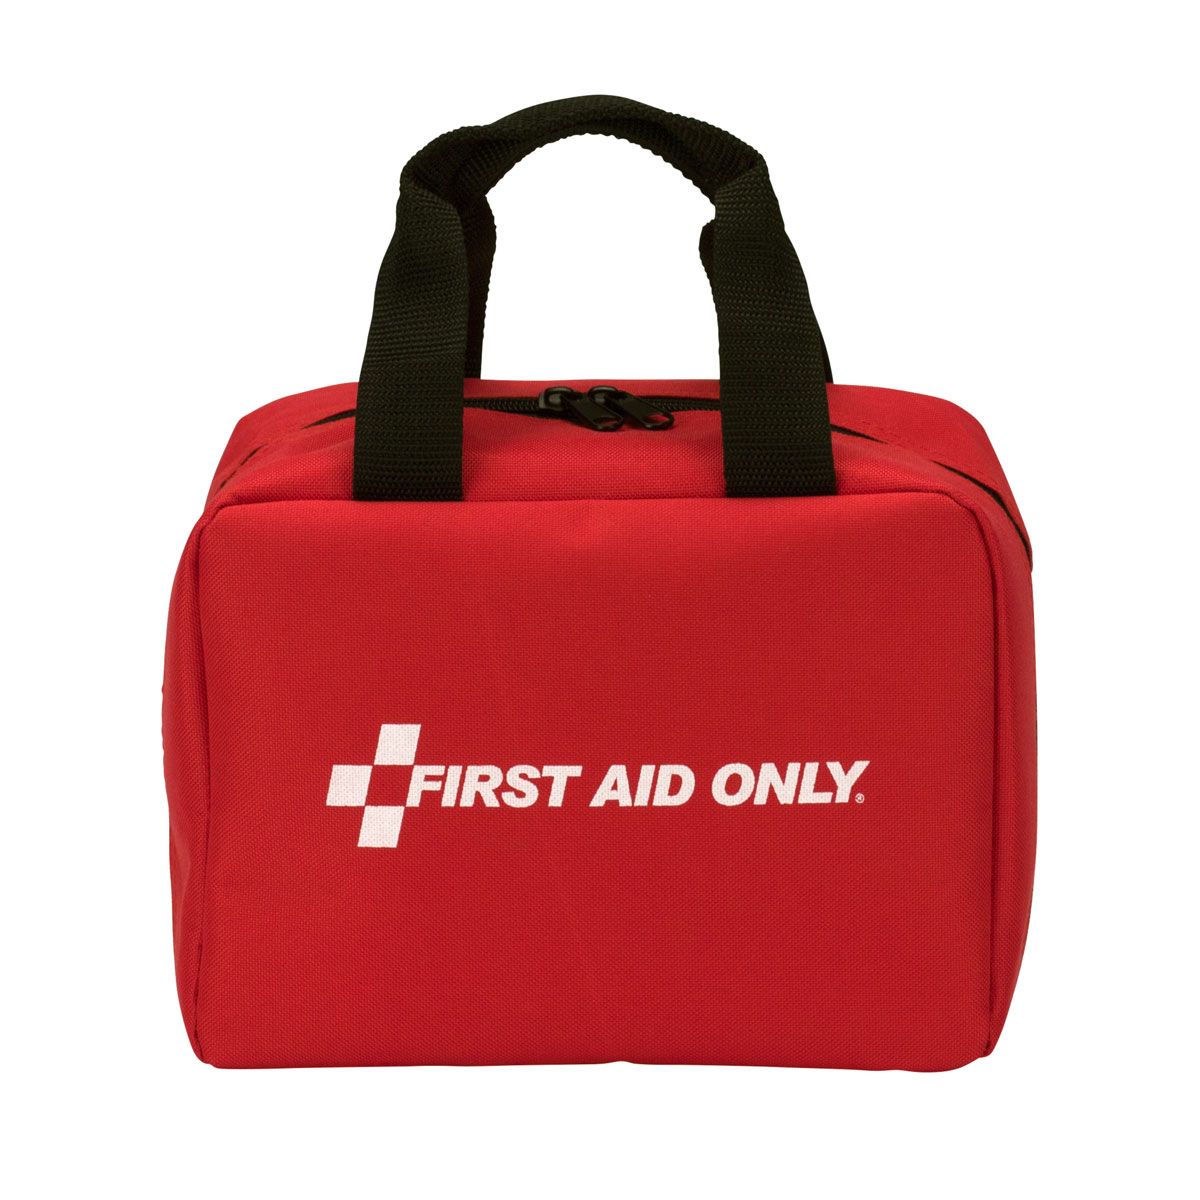 25 Person Bulk Fabric First Aid Kit, ANSI Compliant - W-90594